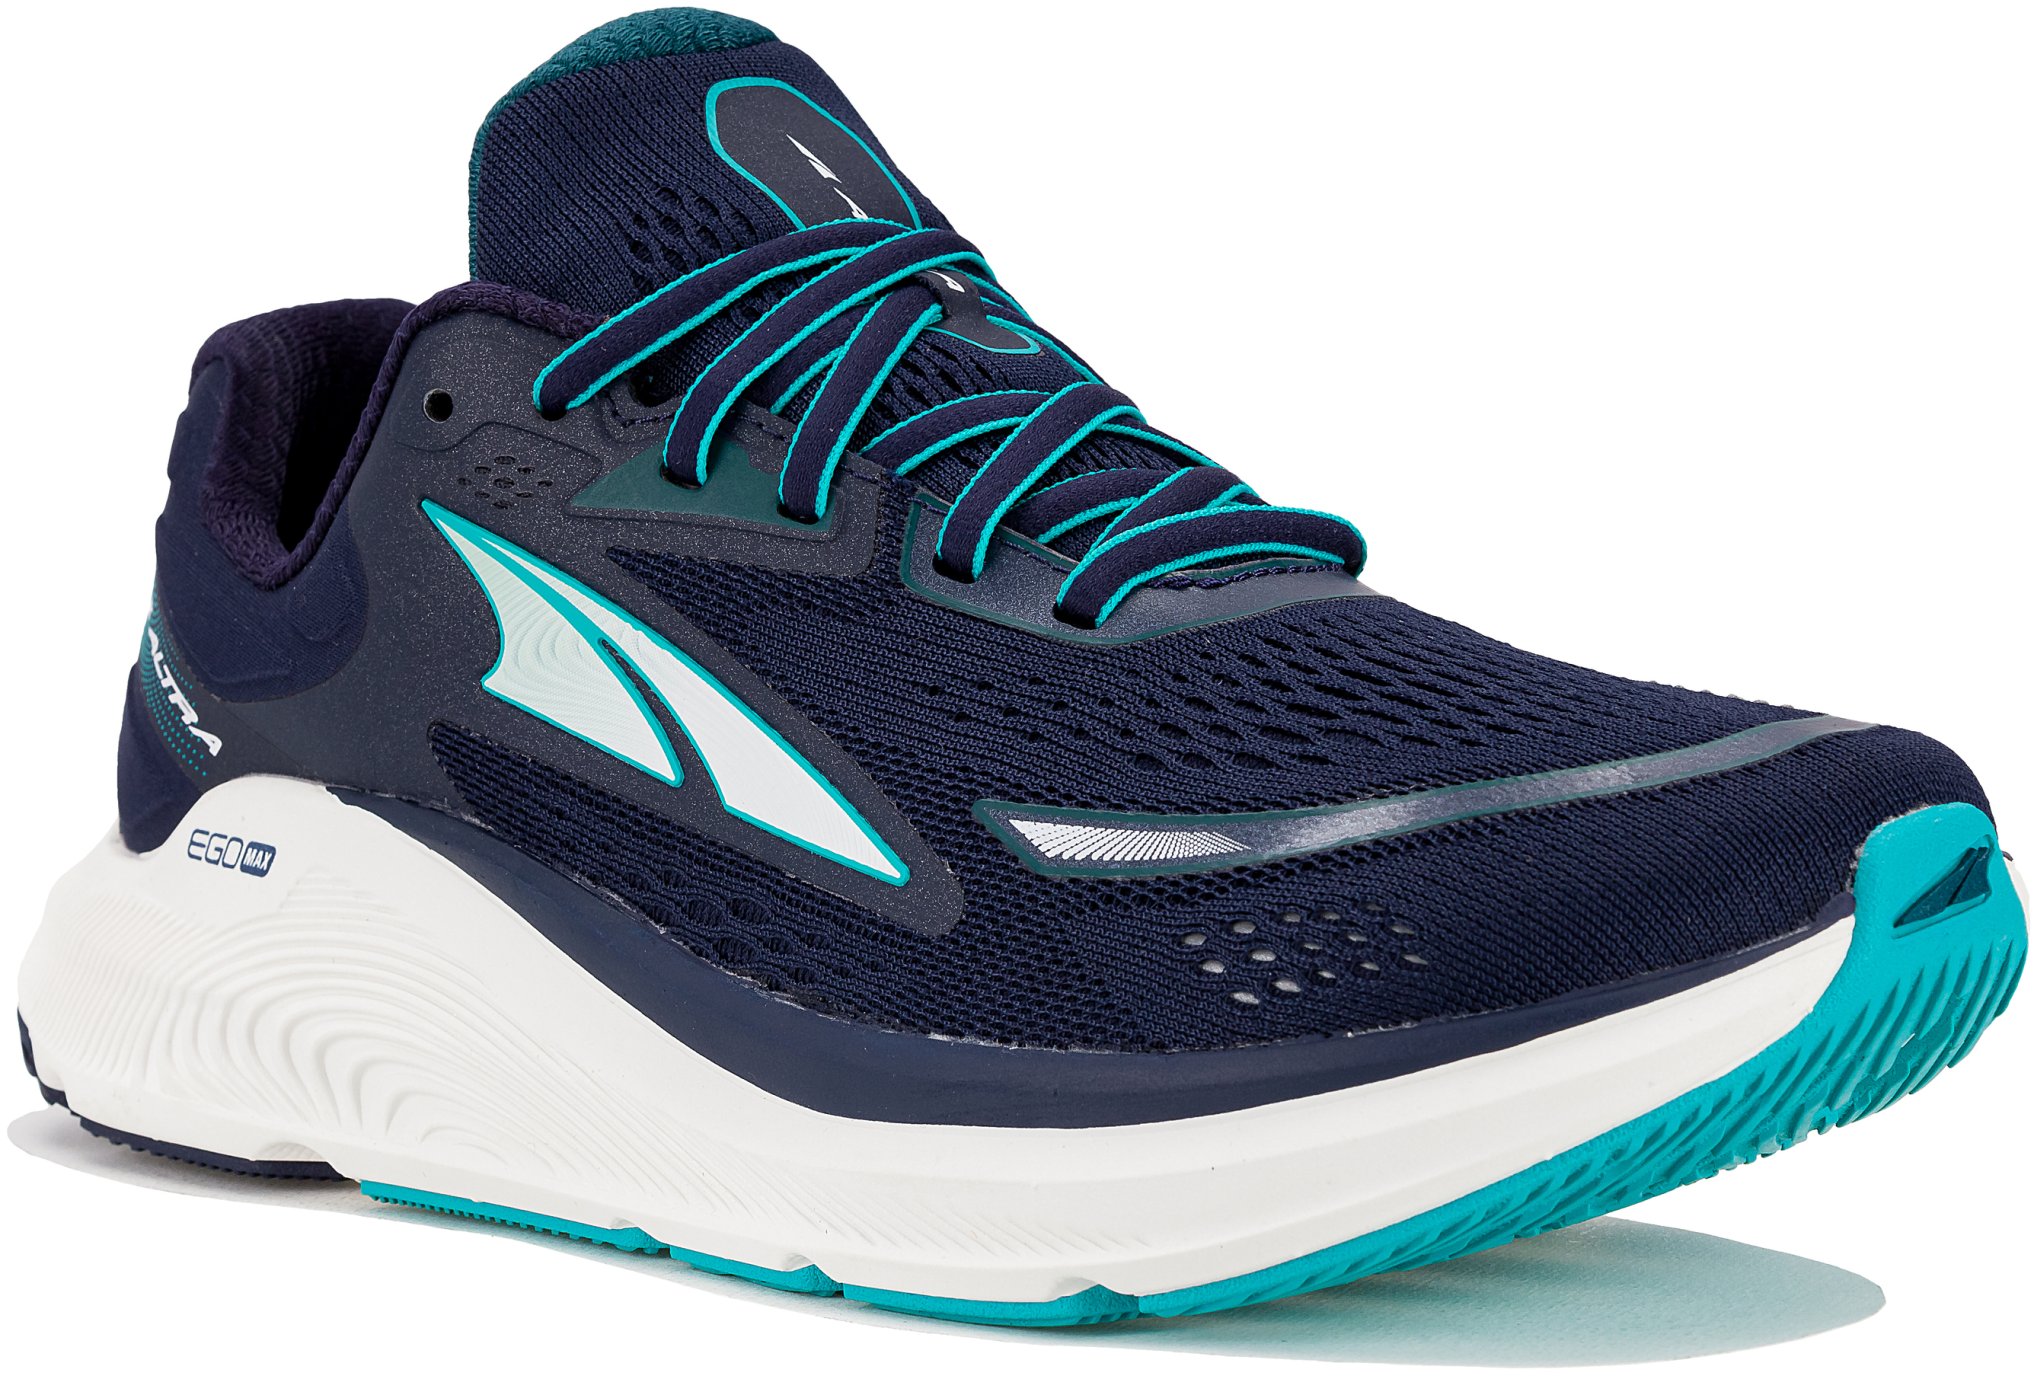 Altra Paradigm 6 W Chaussures running femme déstockage